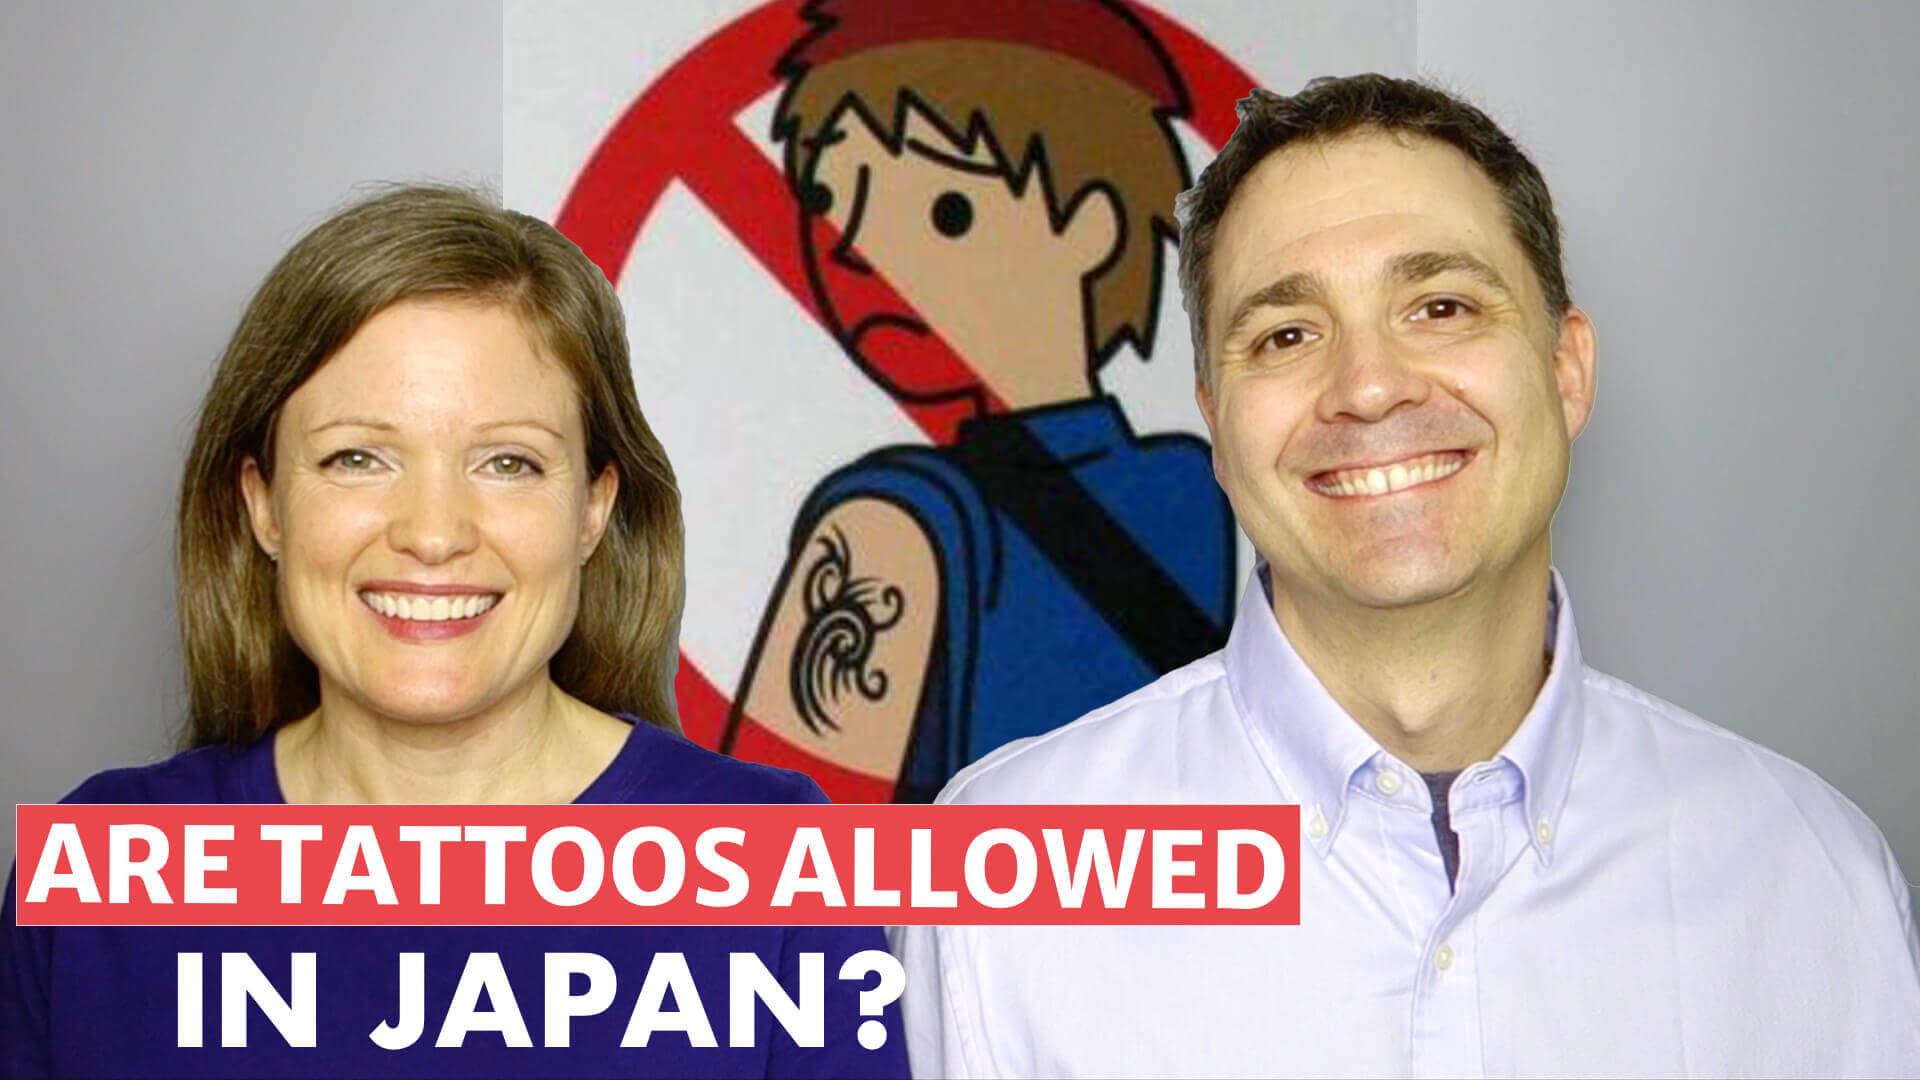 Are Tattoos Not Allowed in Japan?